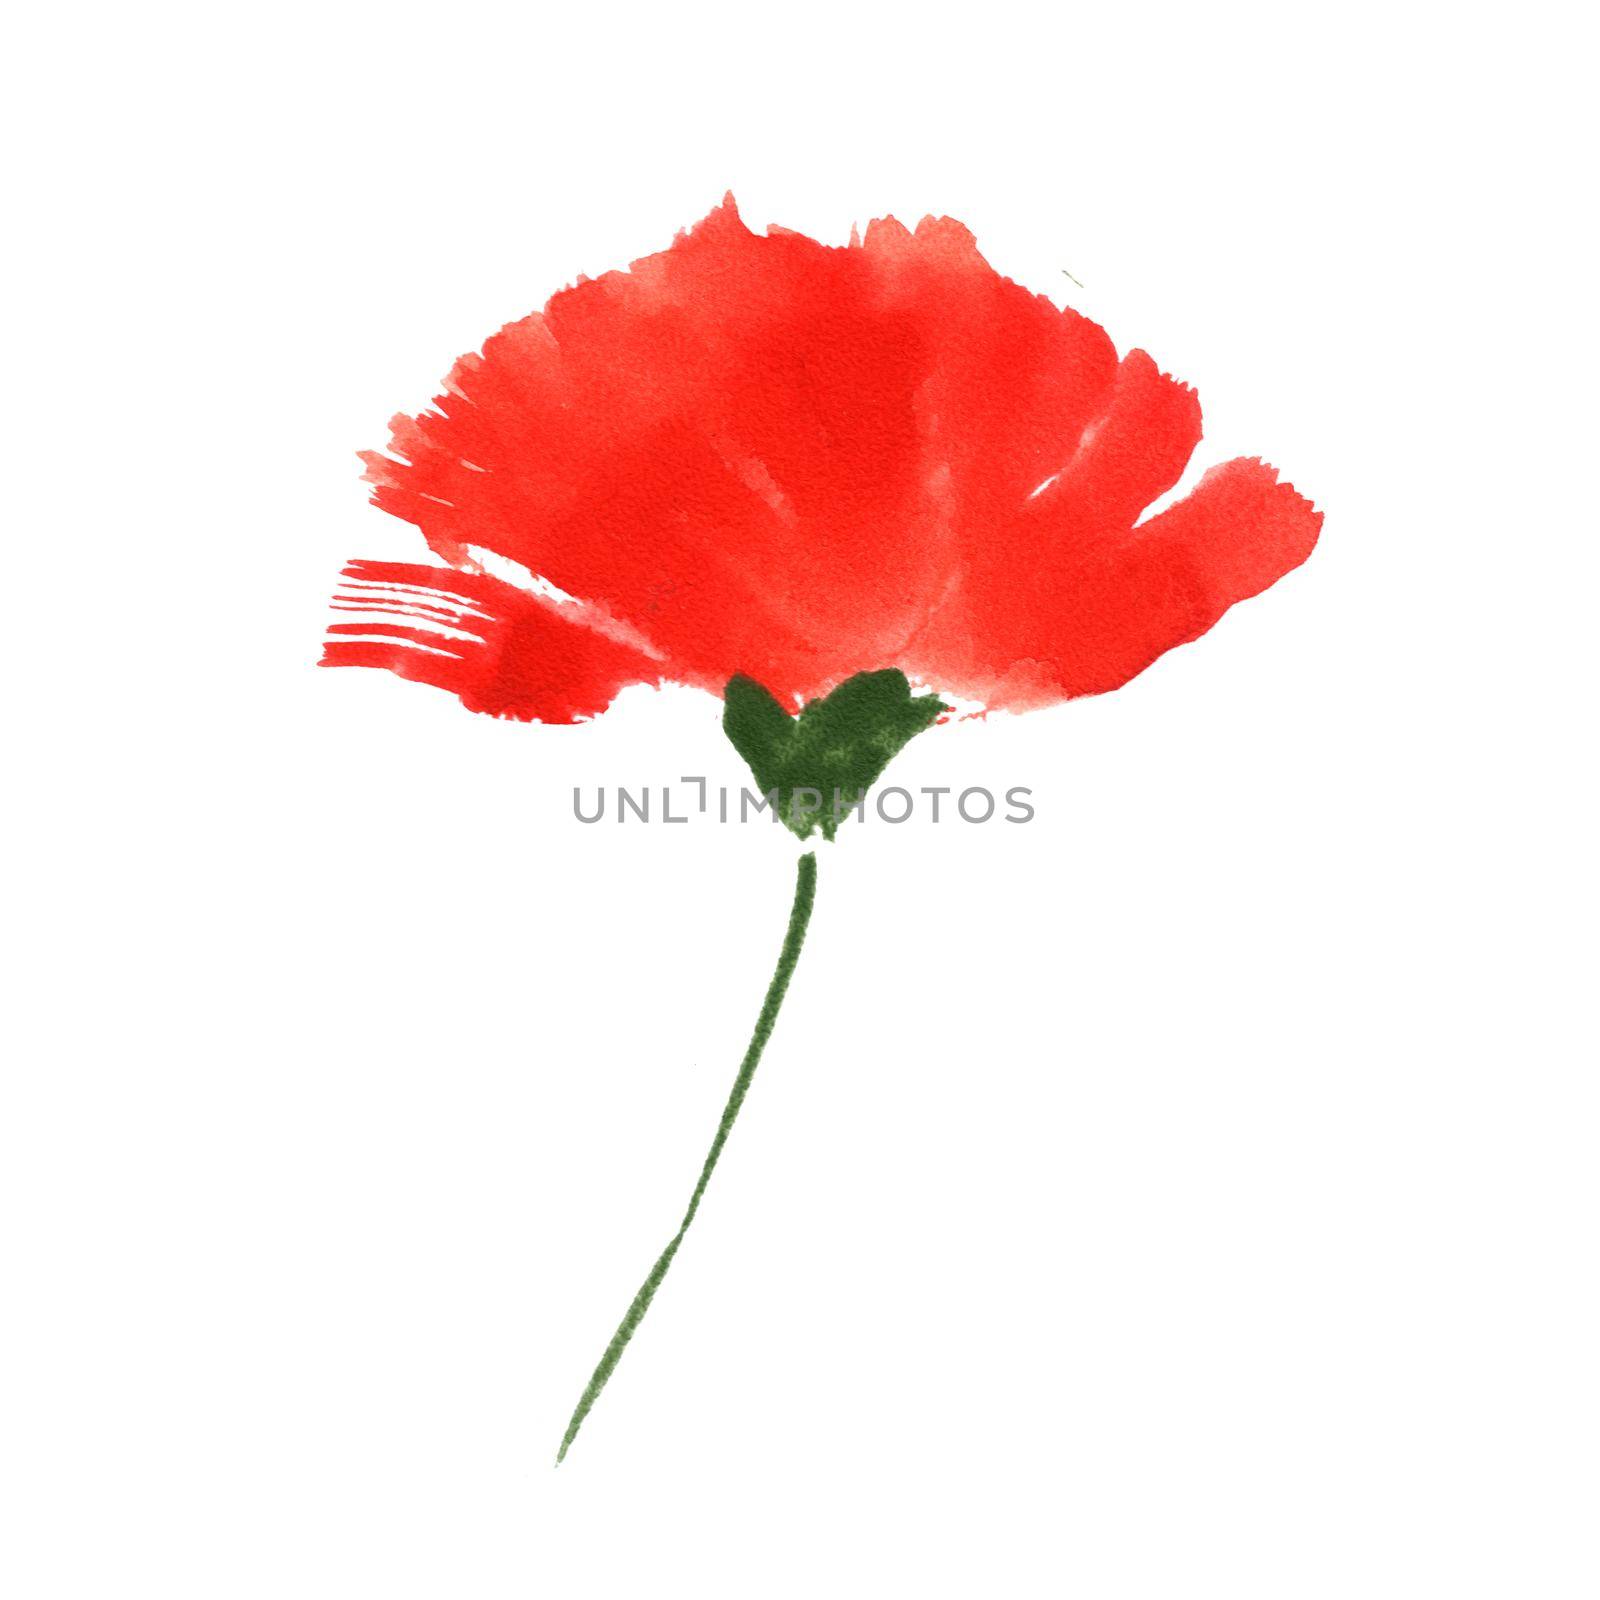 One-stroke watercolor illustration. Remembrance Poppy, symbol of 11 November. White background, path included